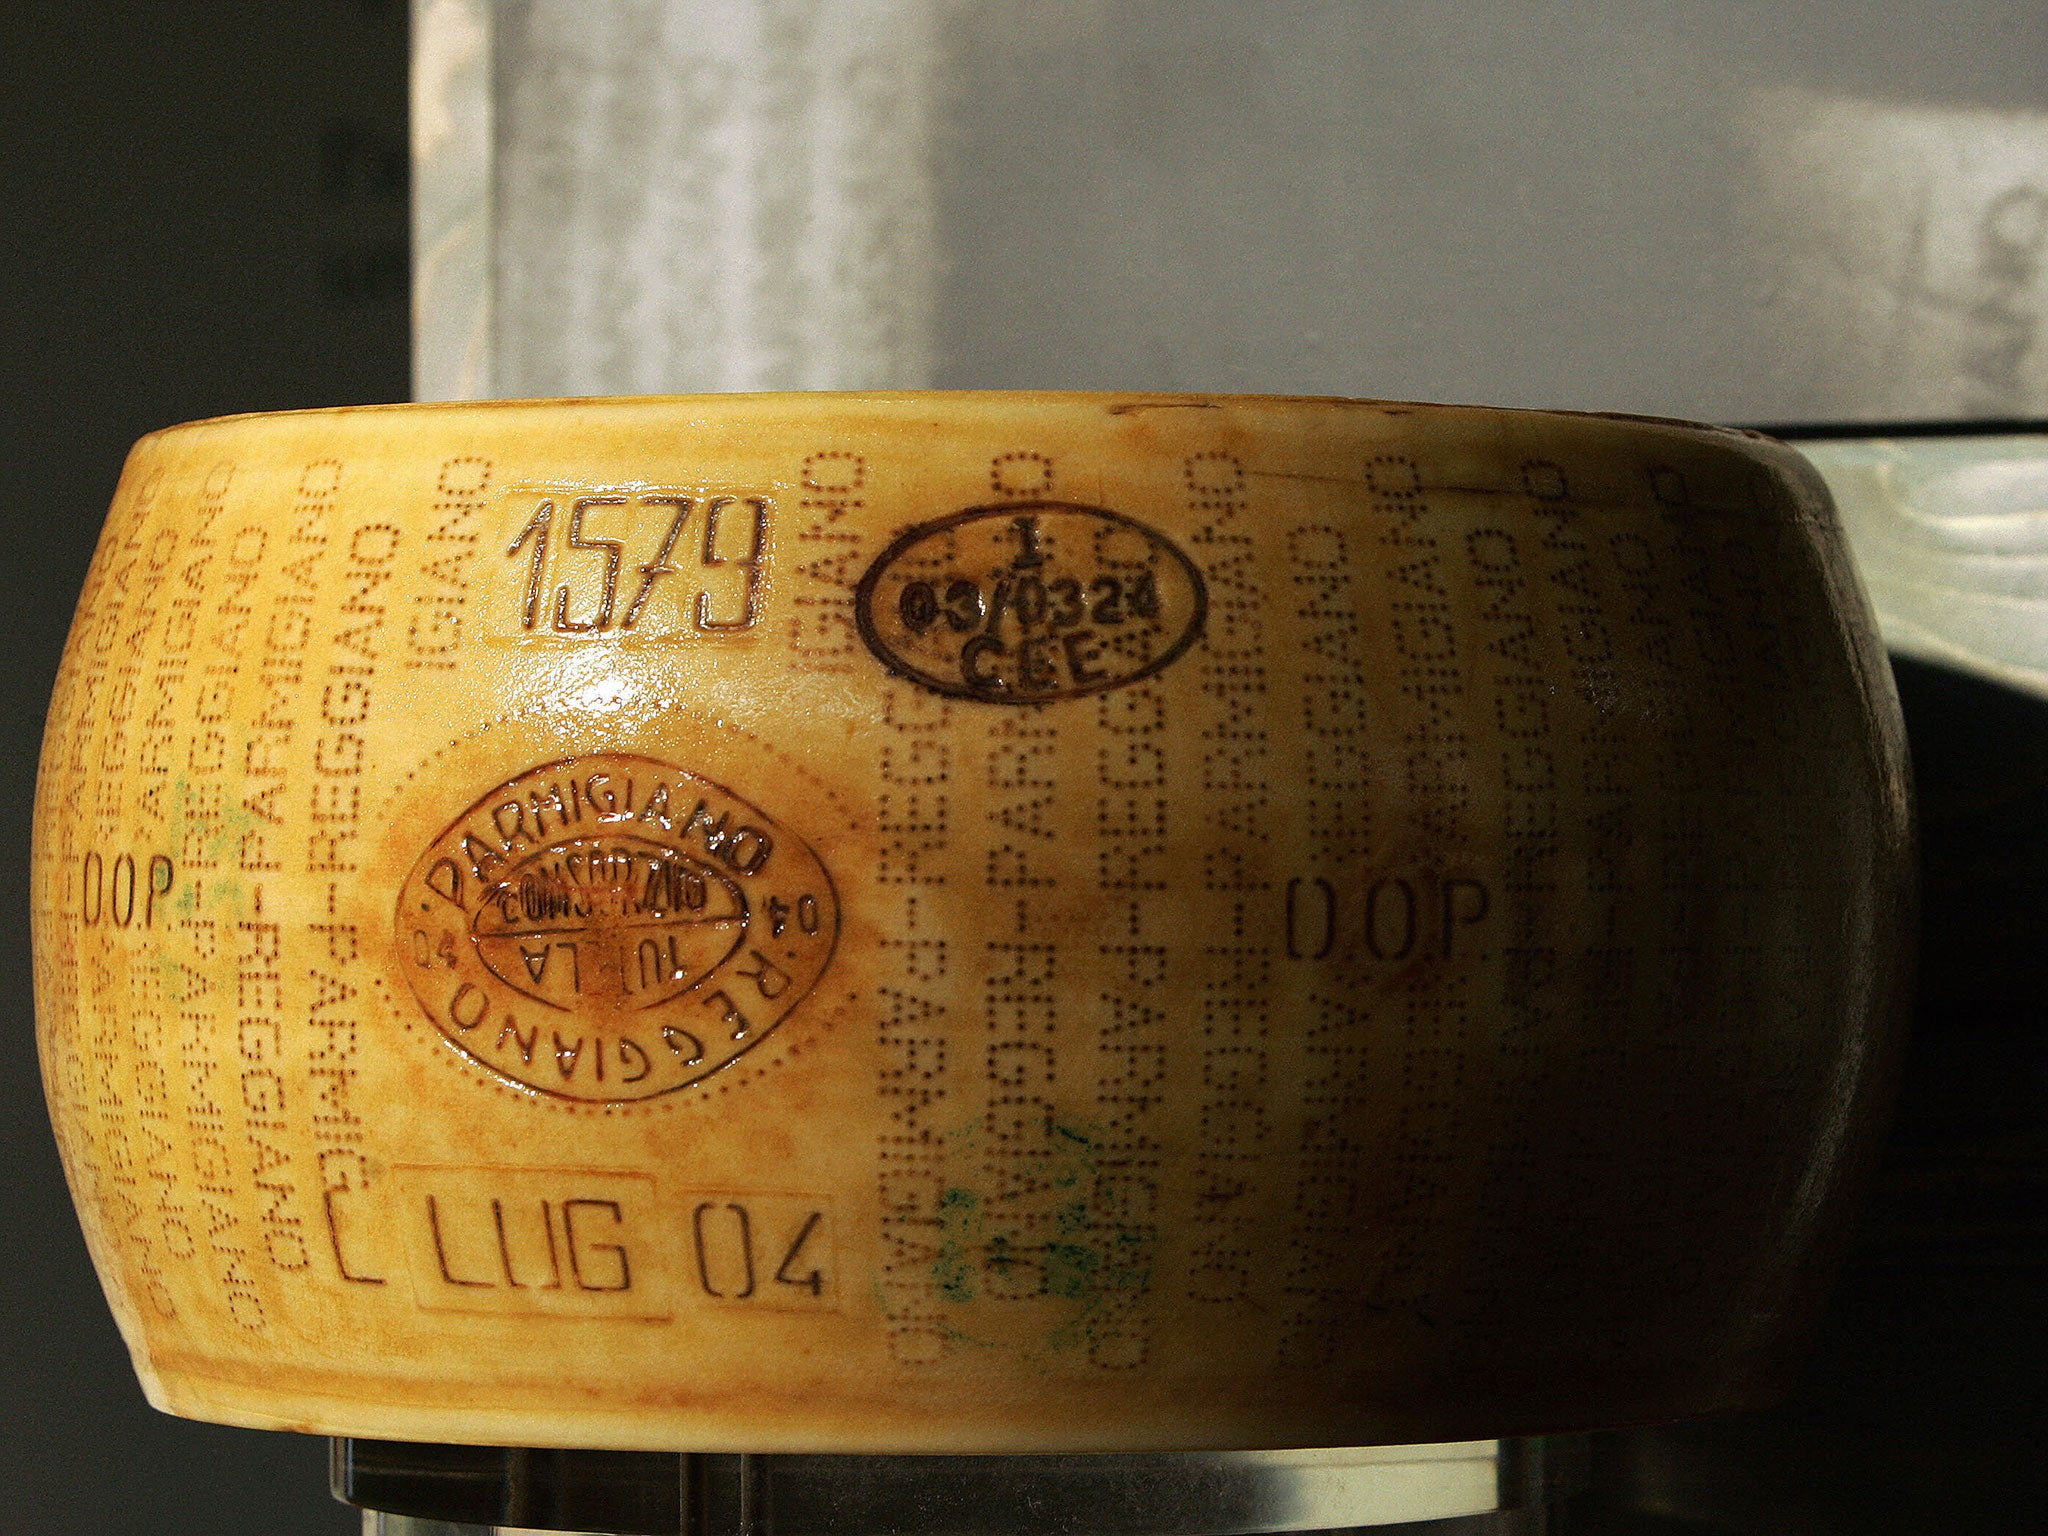 A round of Parmigiano Reggiano pictured in Turin, Italy.